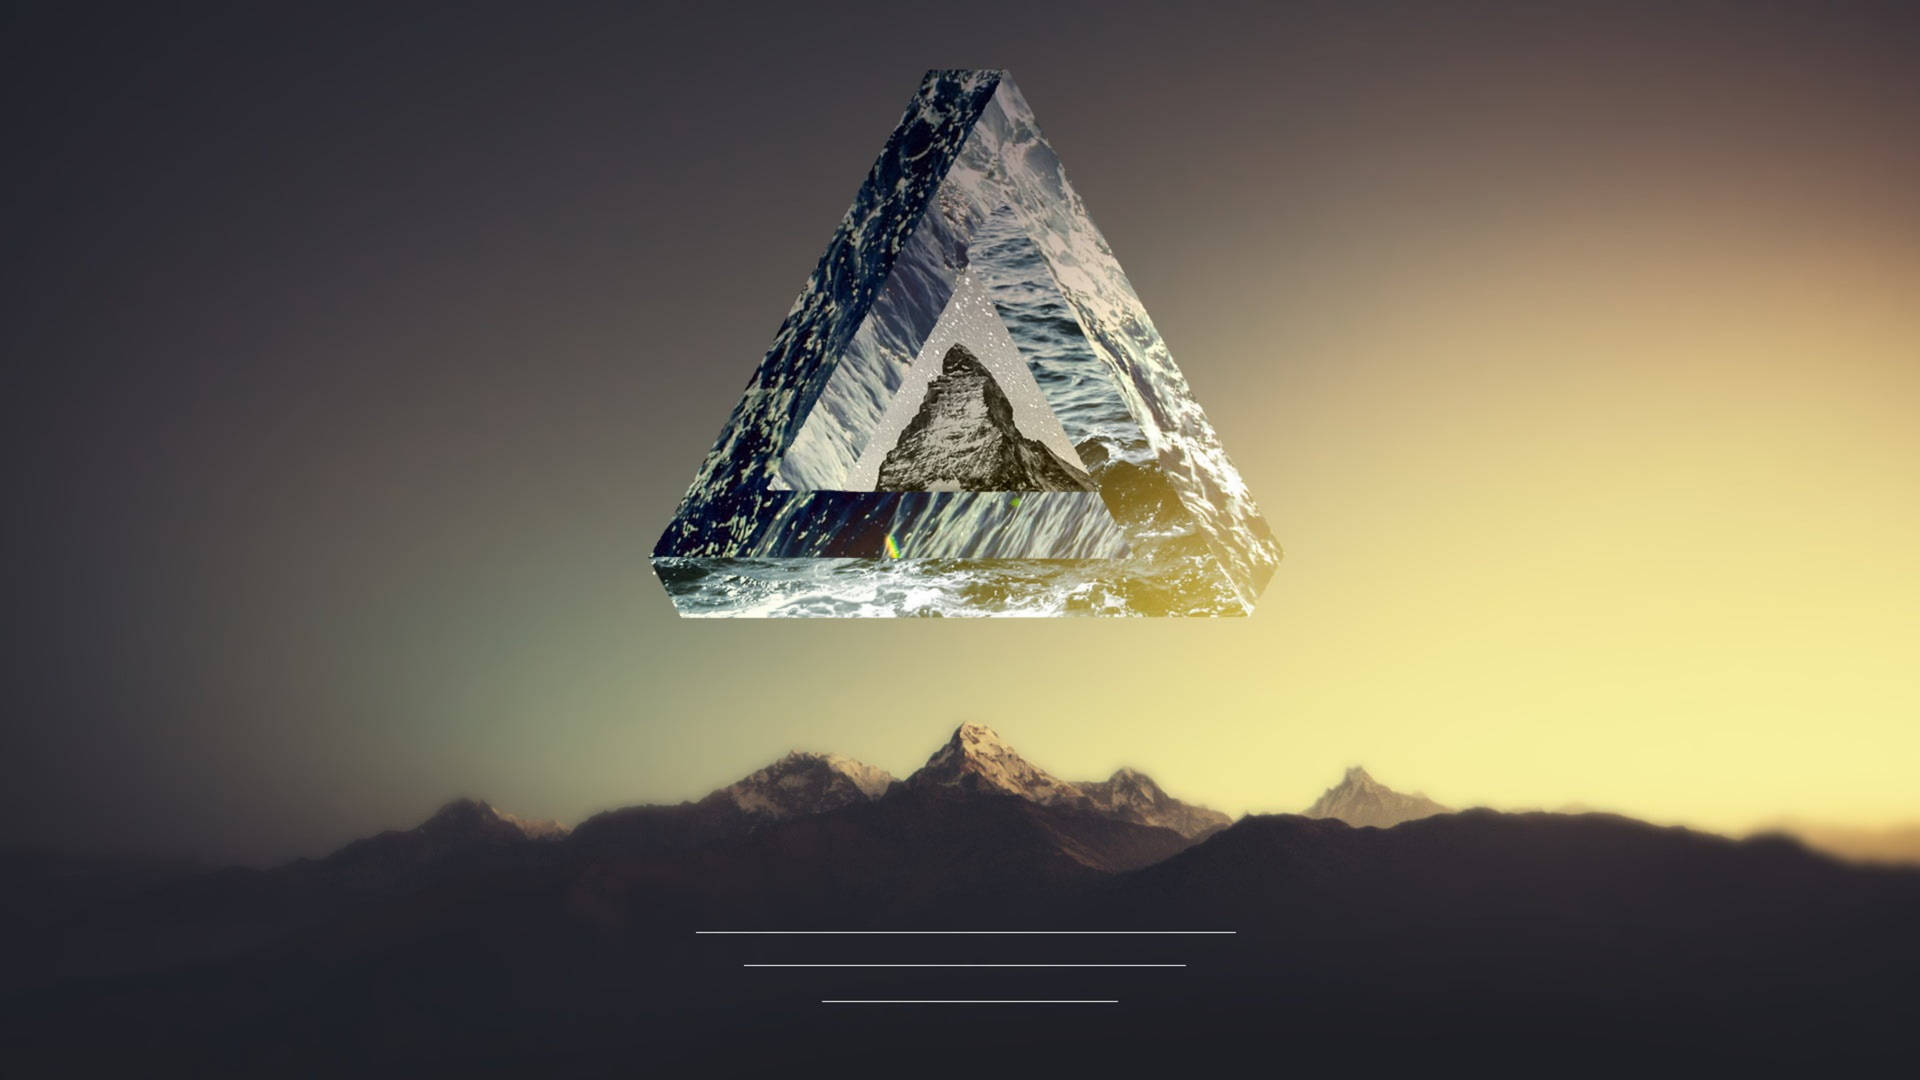 Polyscape Penrose Triangle Mountains Wallpaper